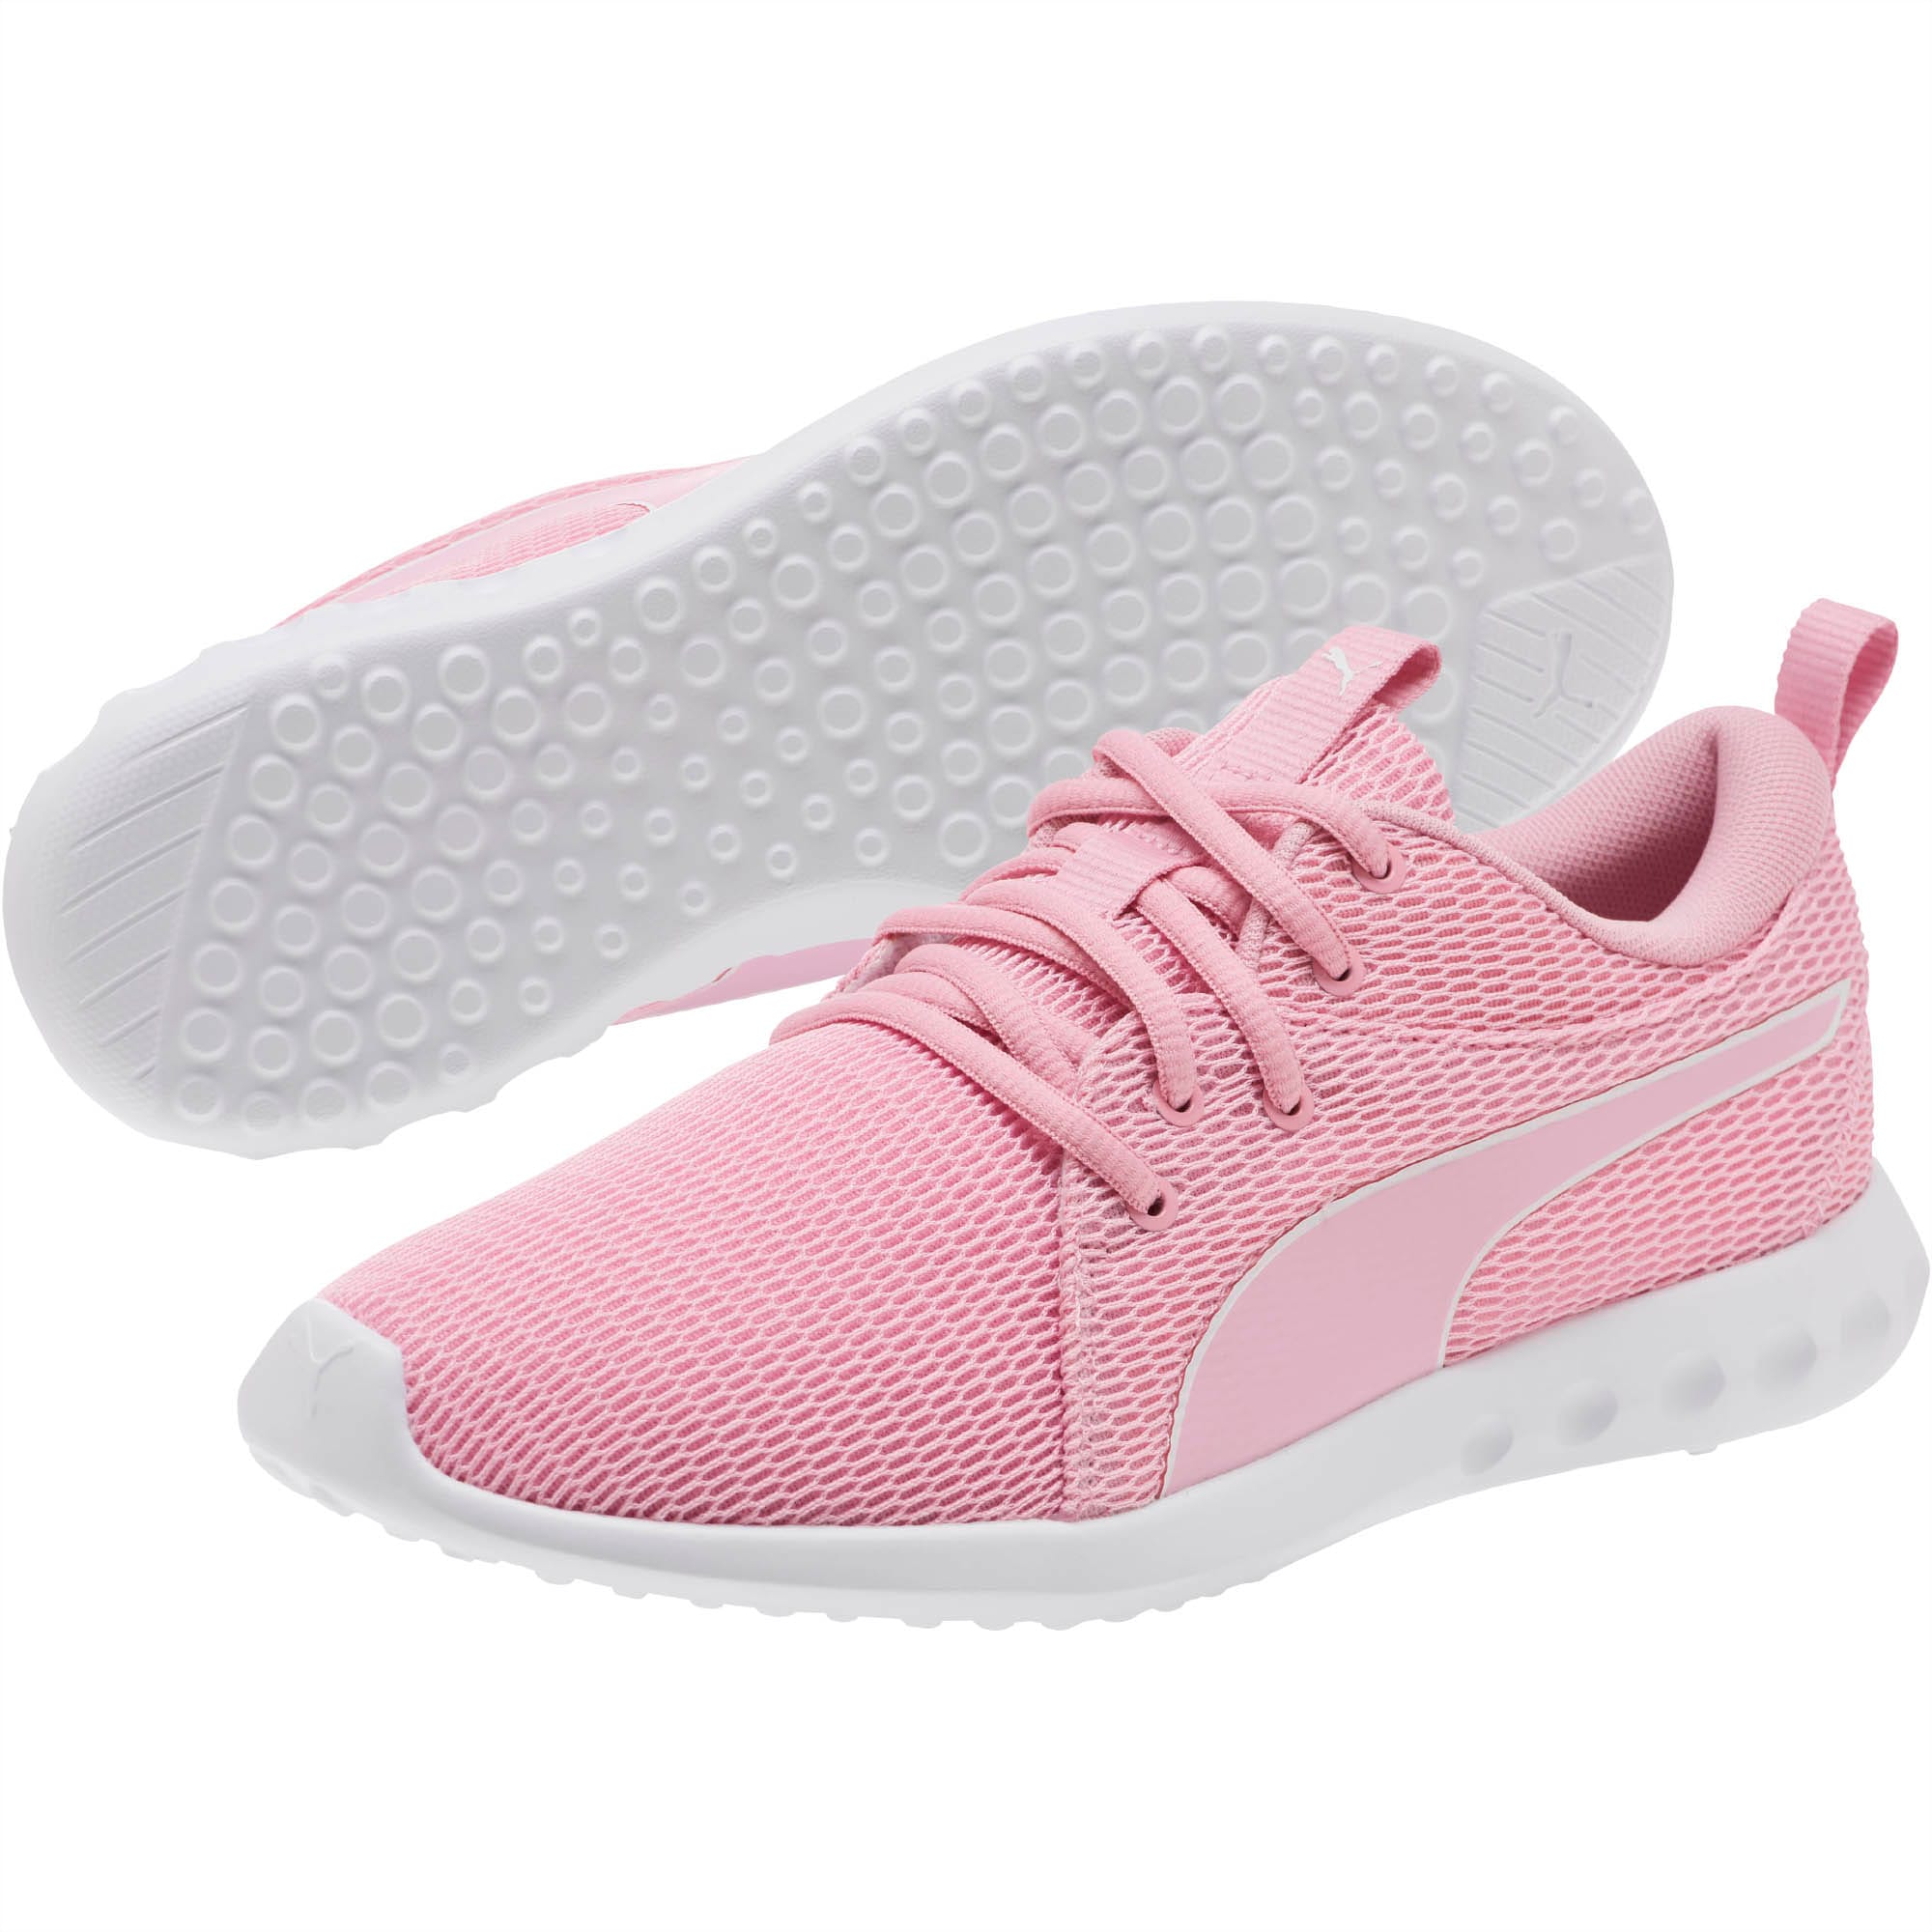 where to buy puma shoes in toronto